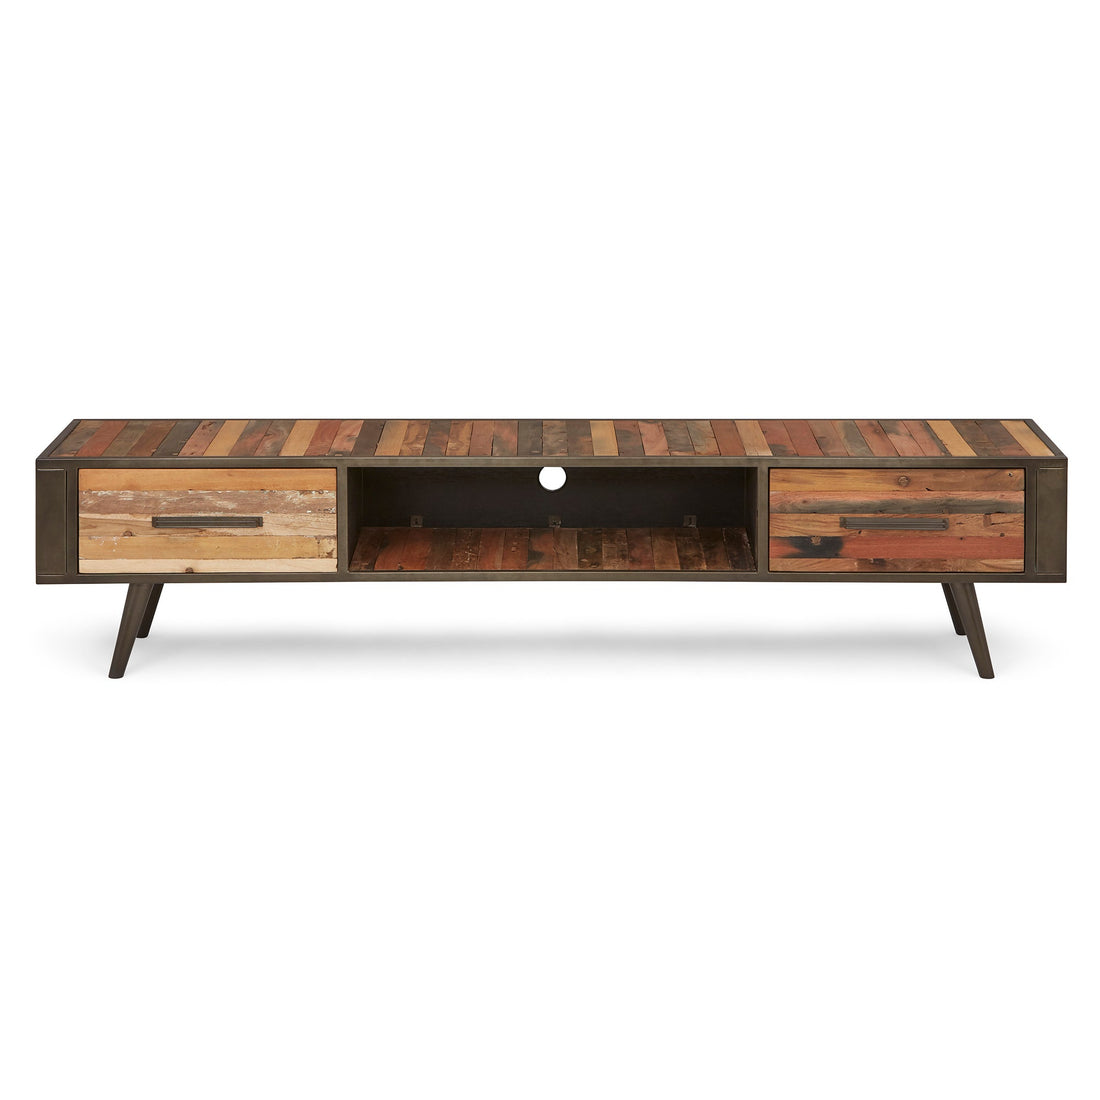 Nordic TV table with 2 drawers